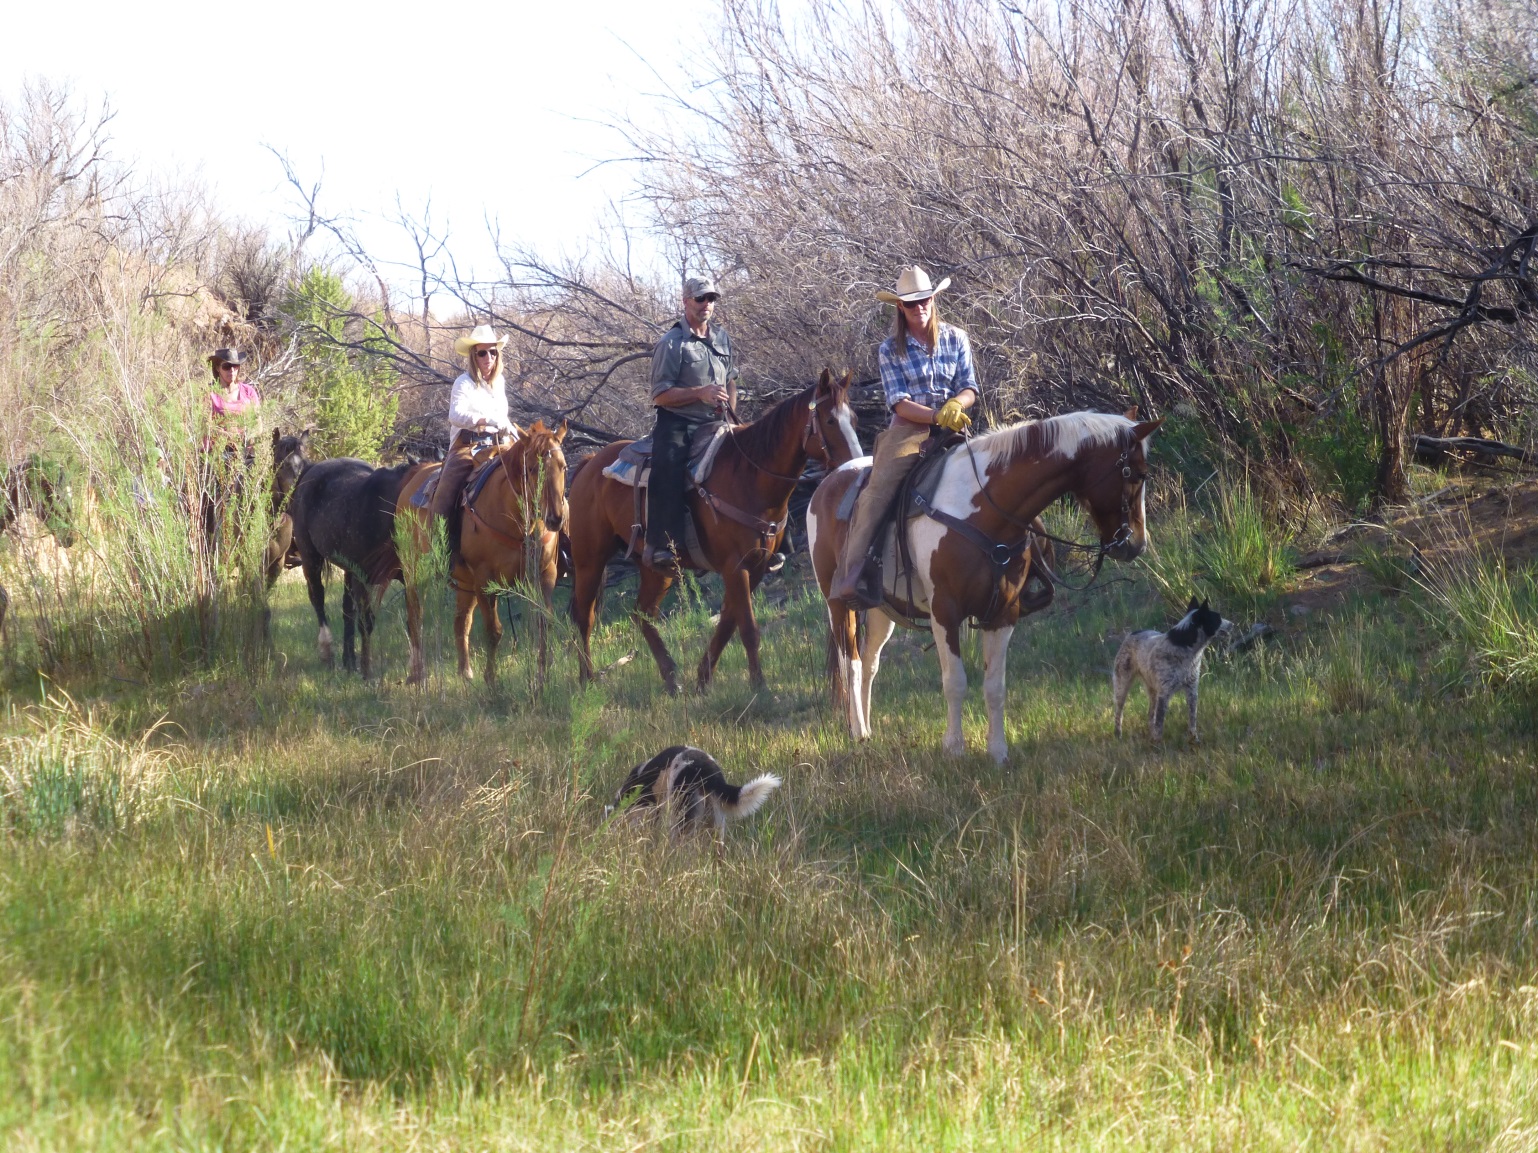 Riding in the lush valley of the Carrizo Creek, accompanied by the dogs